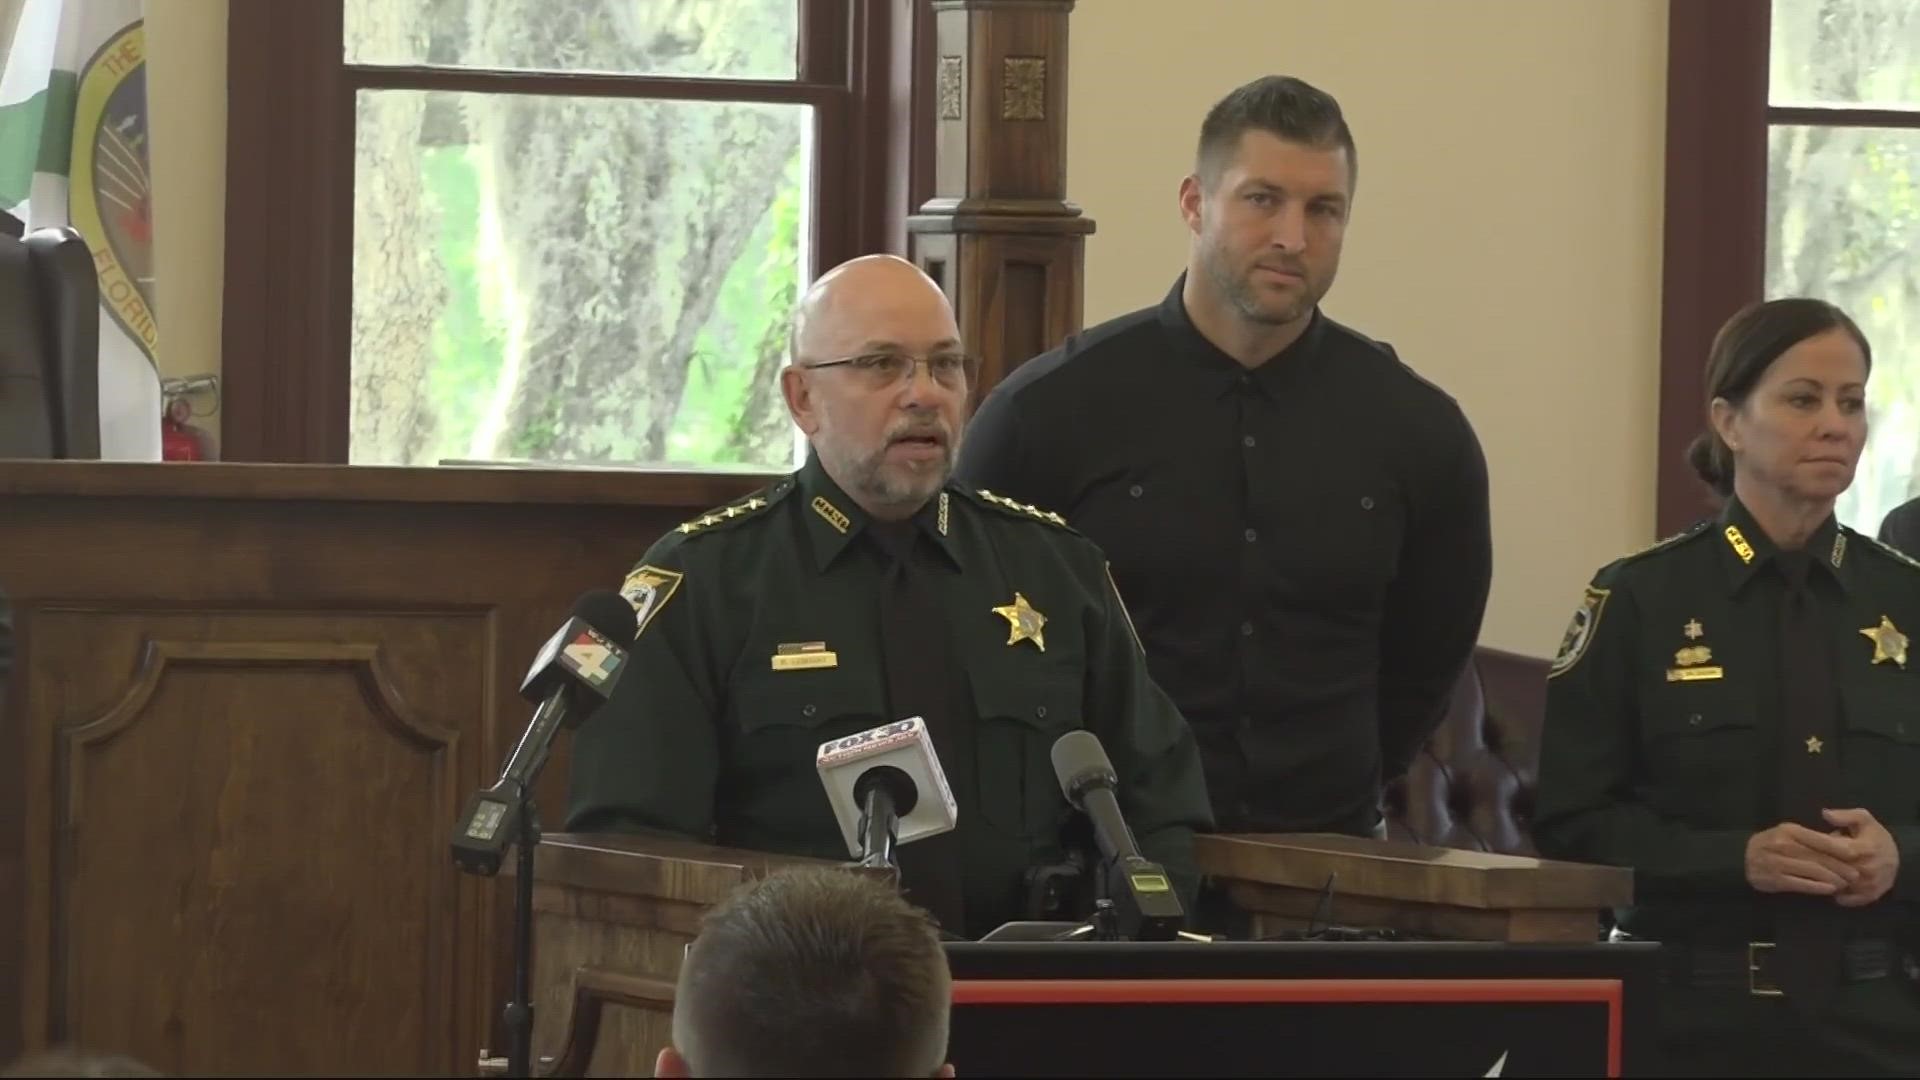 Northeast Florida law enforcement leaders, State Representative Sam Garrison, Operation Lightshine, and the Tim Tebow Foundation made the announcement Thursday.